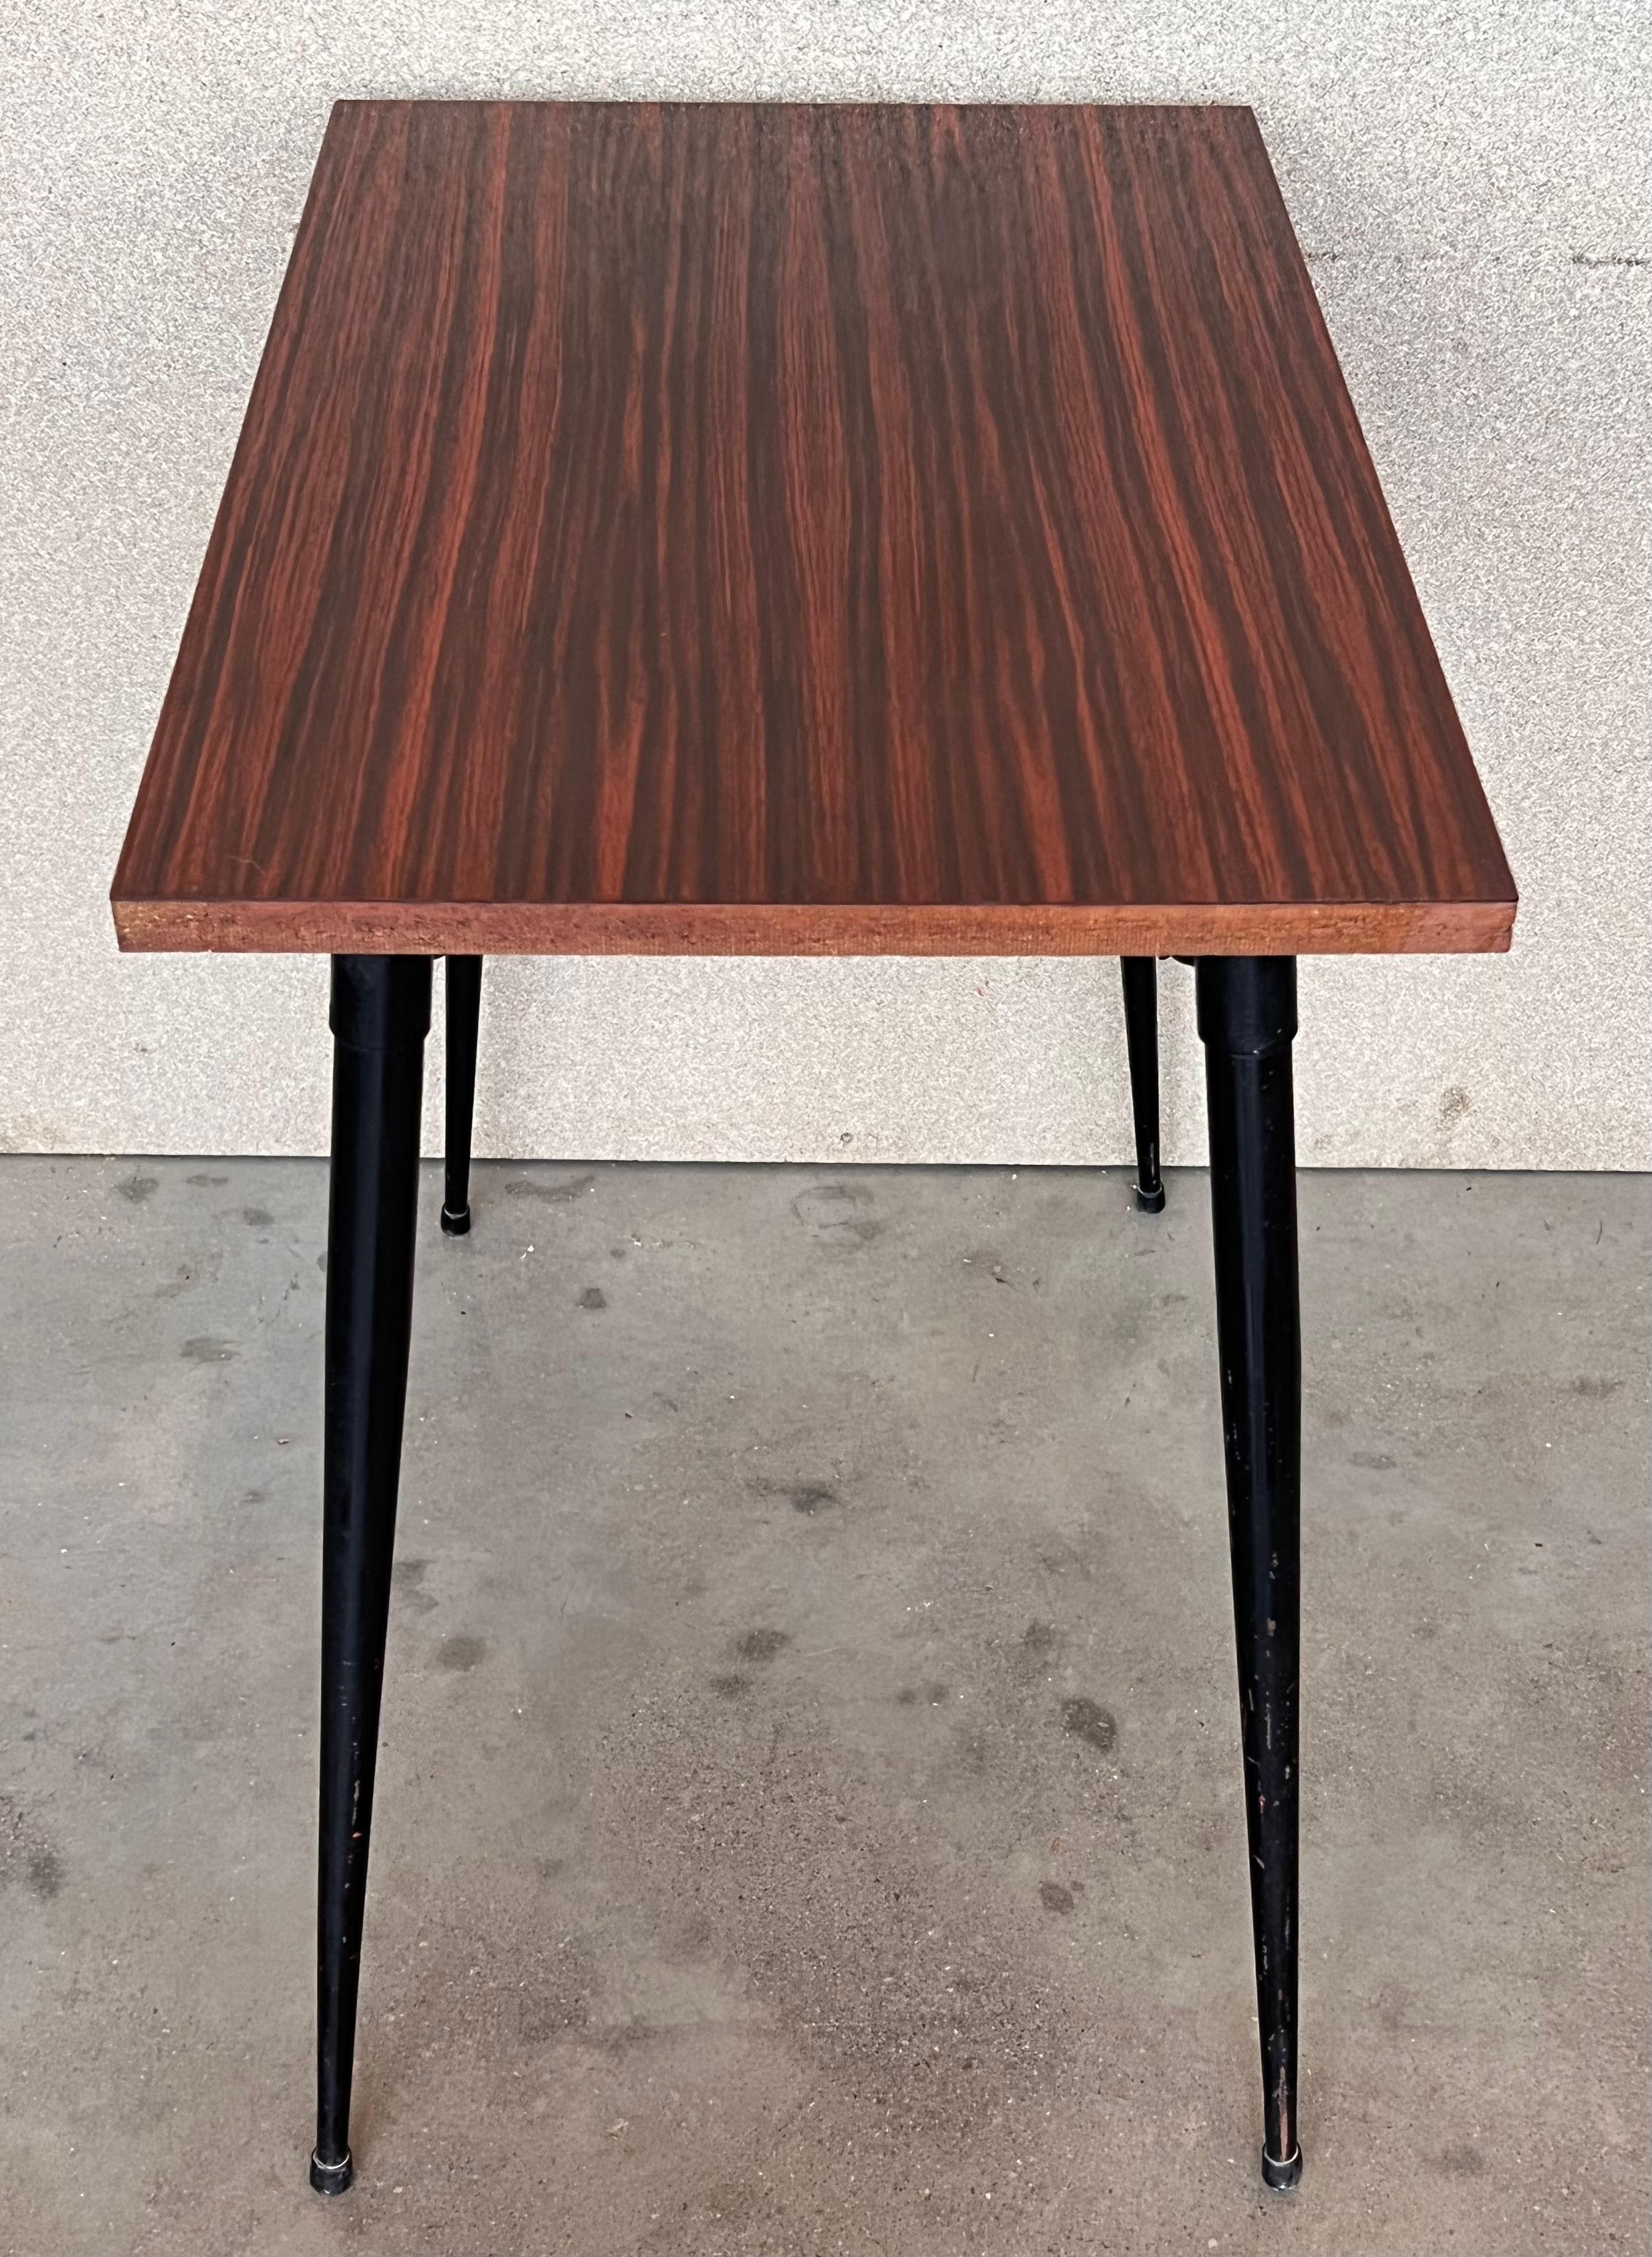 20th Century Mid Century Modern School Desk with drawer and Iron Legs, 8 pieces available For Sale